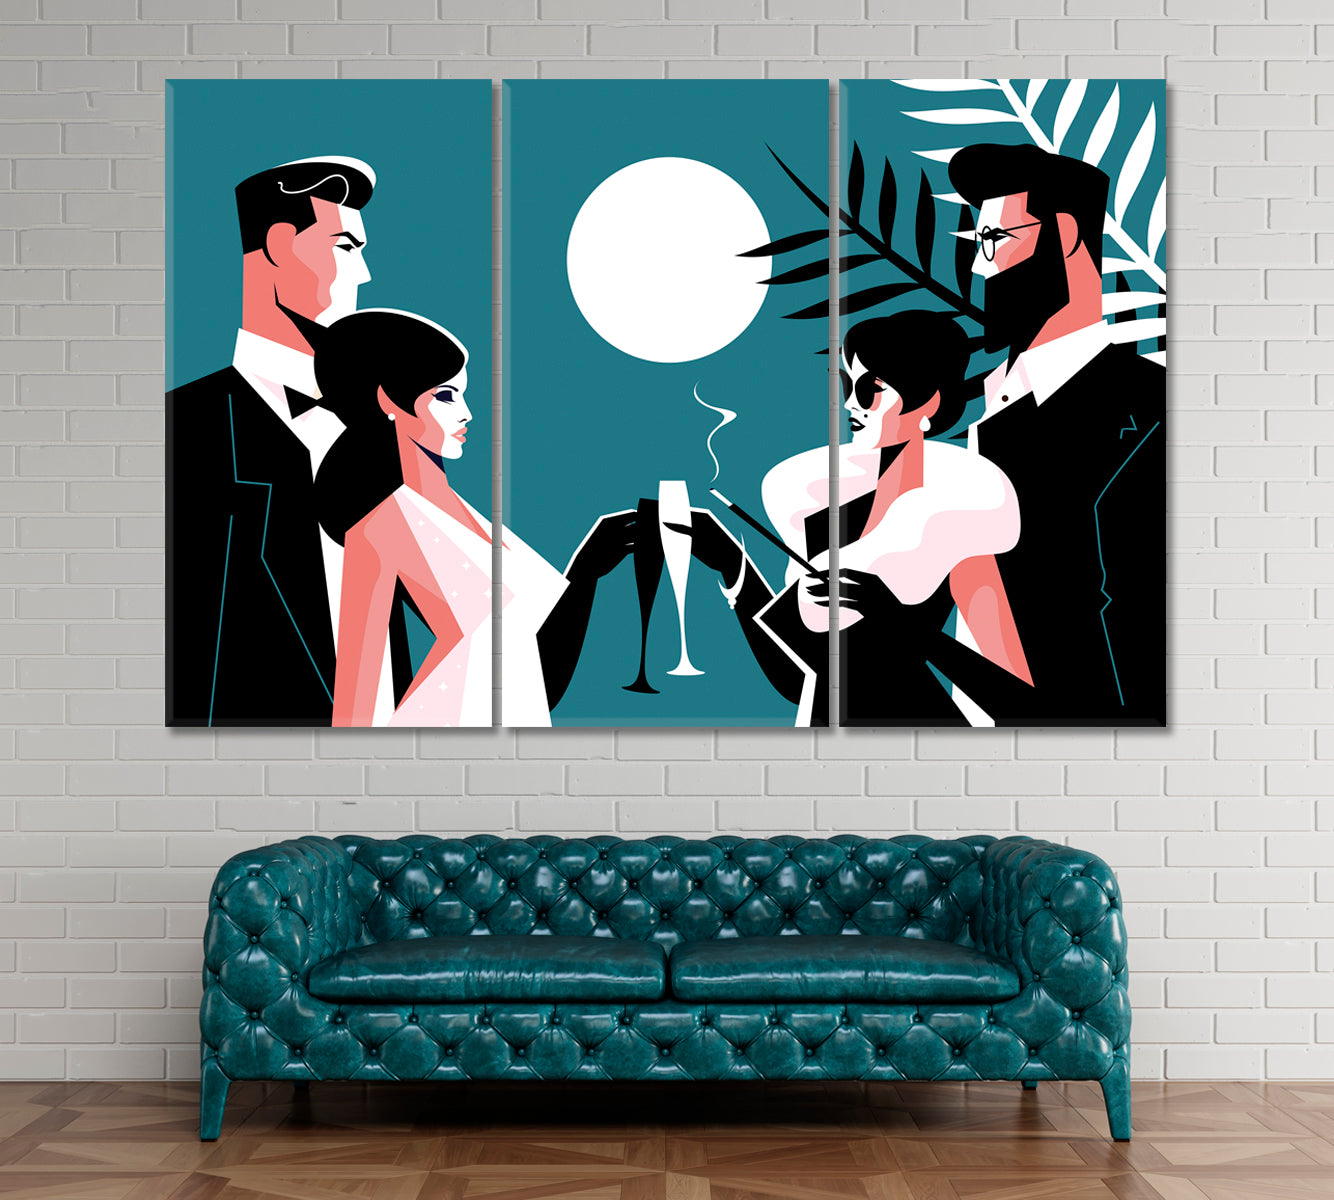 Elegant Couples at Fashion Night Party Canvas Print ArtLexy 3 Panels 36"x24" inches 